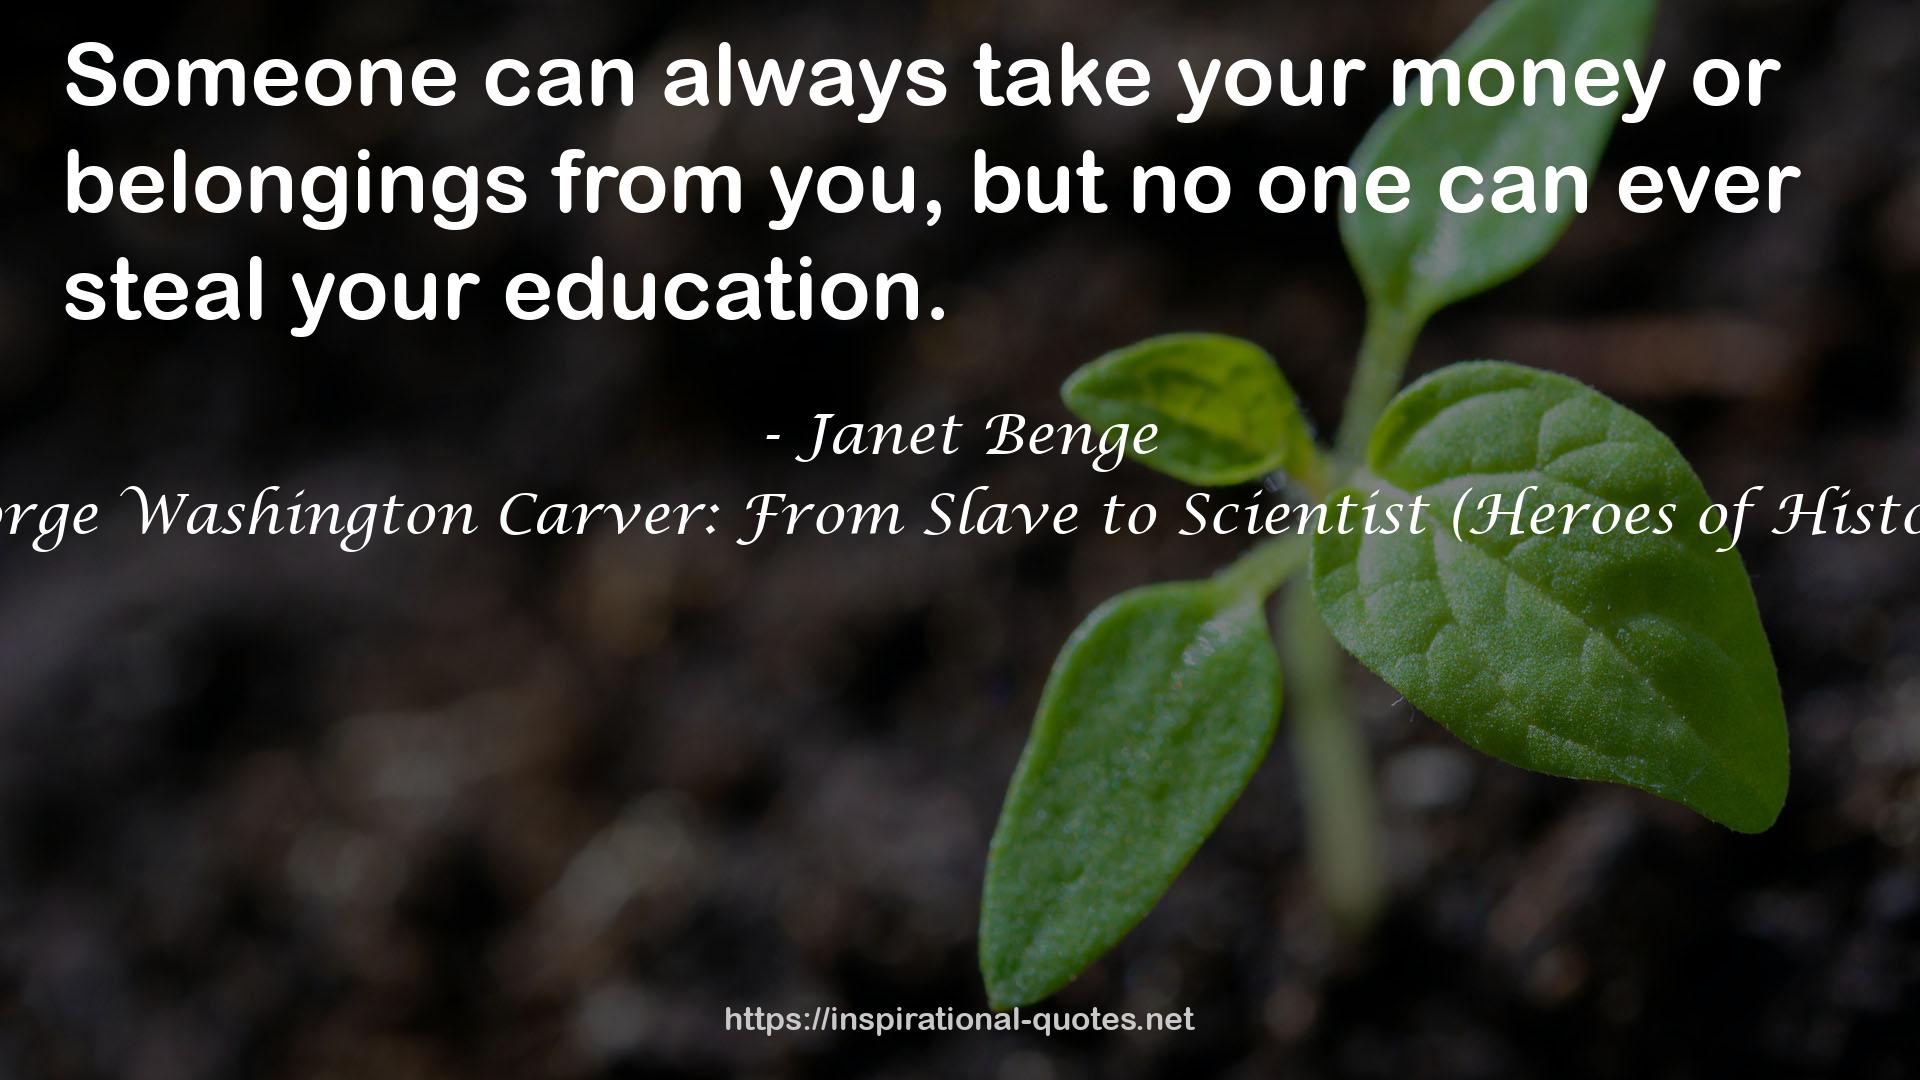 George Washington Carver: From Slave to Scientist (Heroes of History) QUOTES